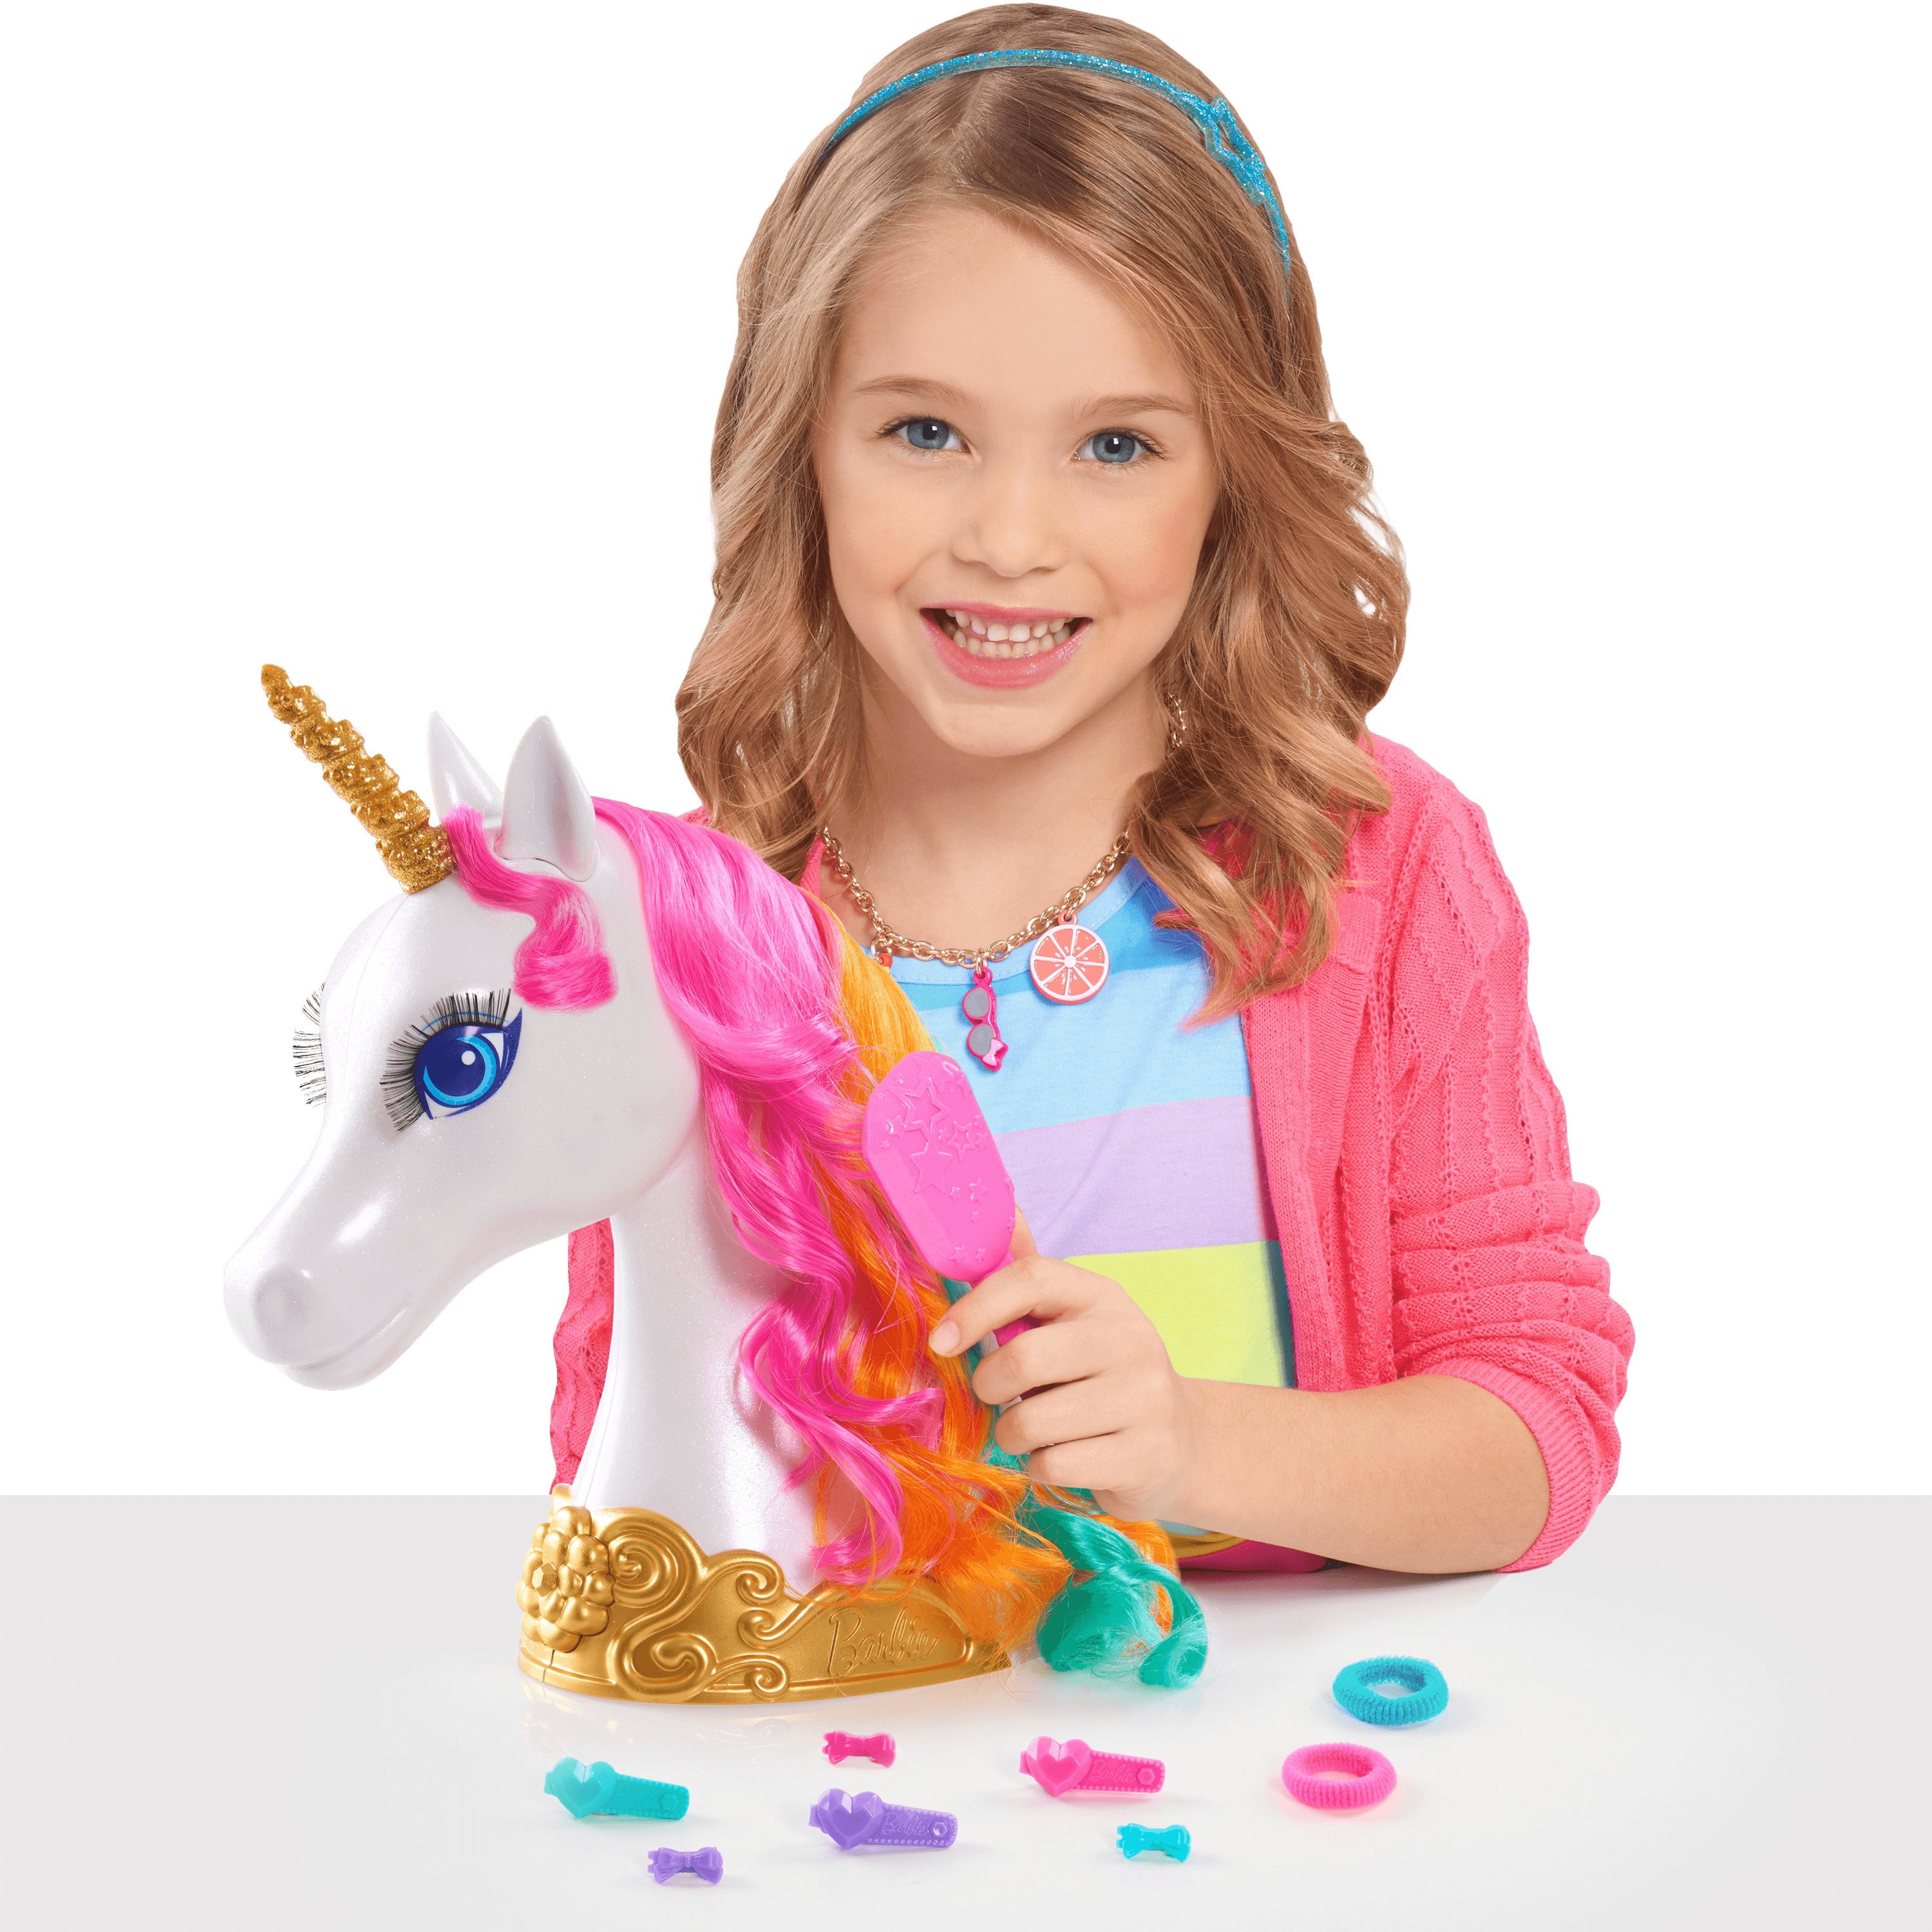 Barbie Dreamtopia Unicorn Styling Head, 10-pieces, Kids Toys for Ages 3 Up, Gifts and Presents - image 3 of 4